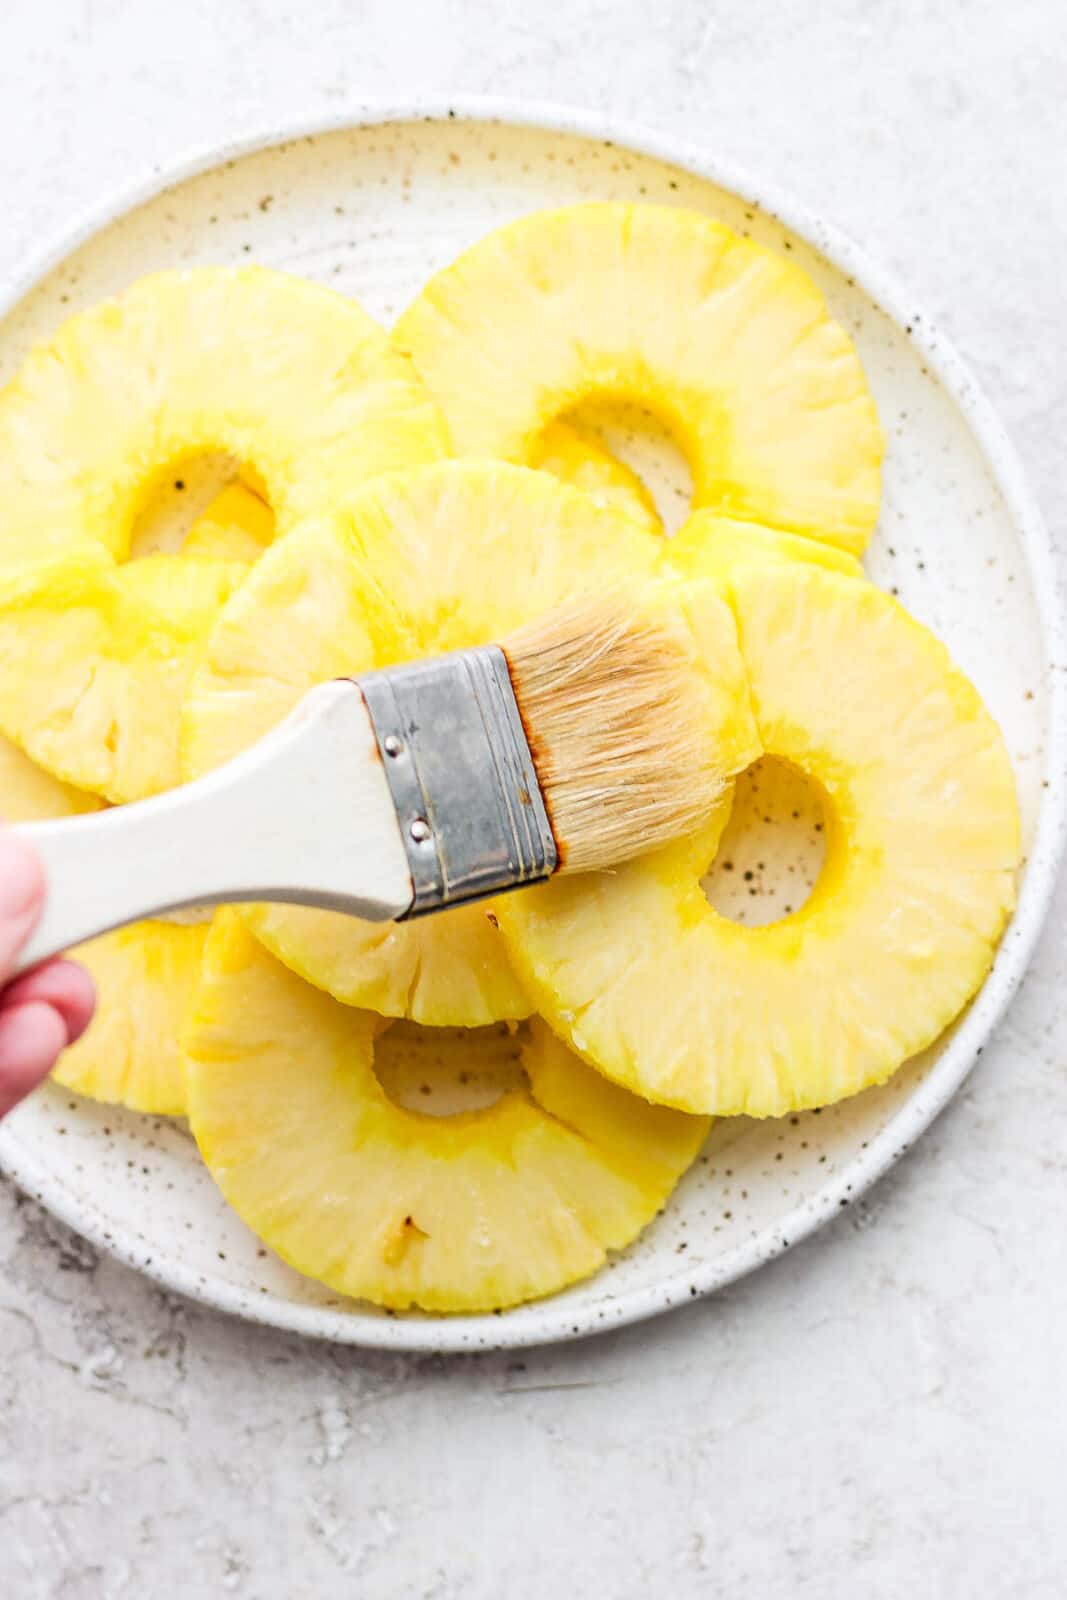 Olive oil being brushed on pineapple slices.